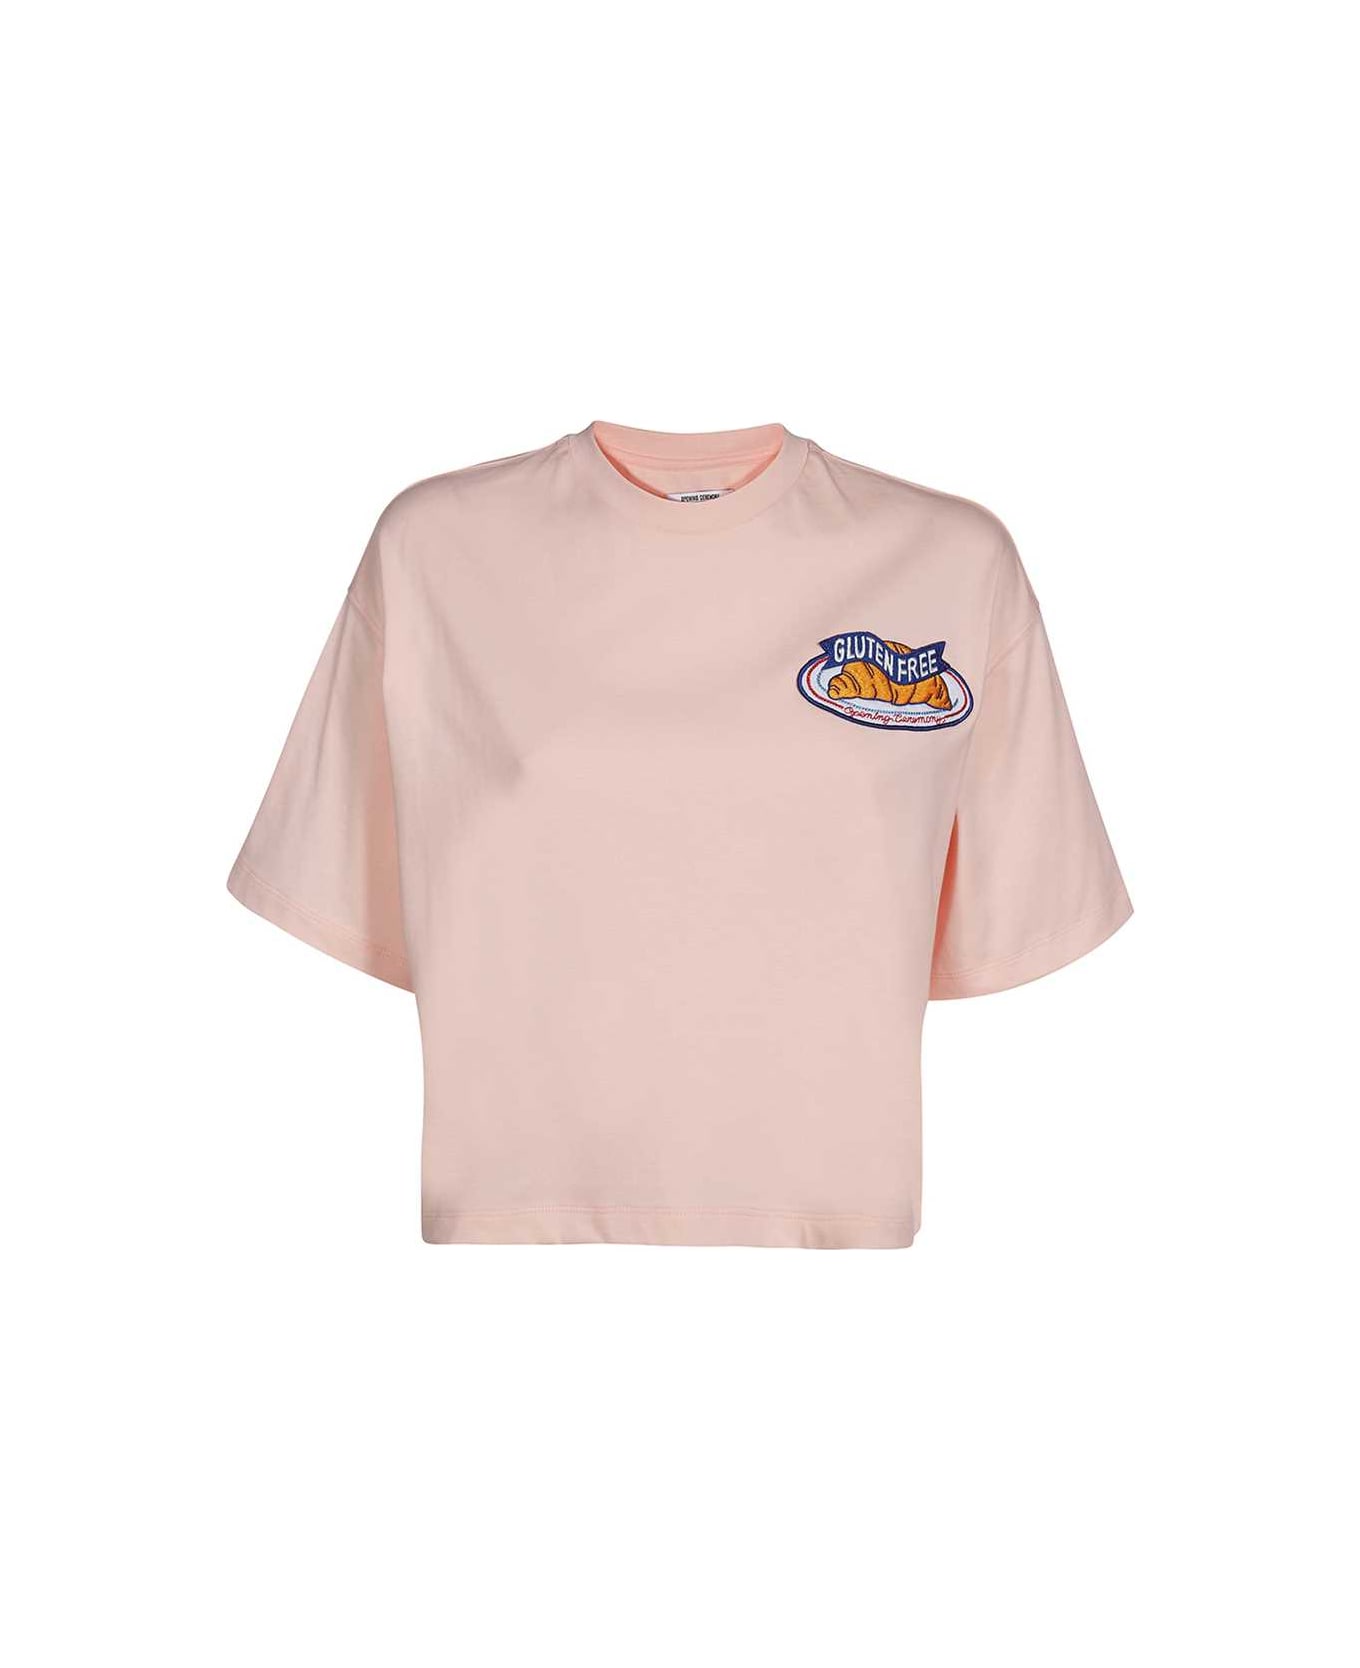 Opening Ceremony Cotton T-shirt - Pink Tシャツ